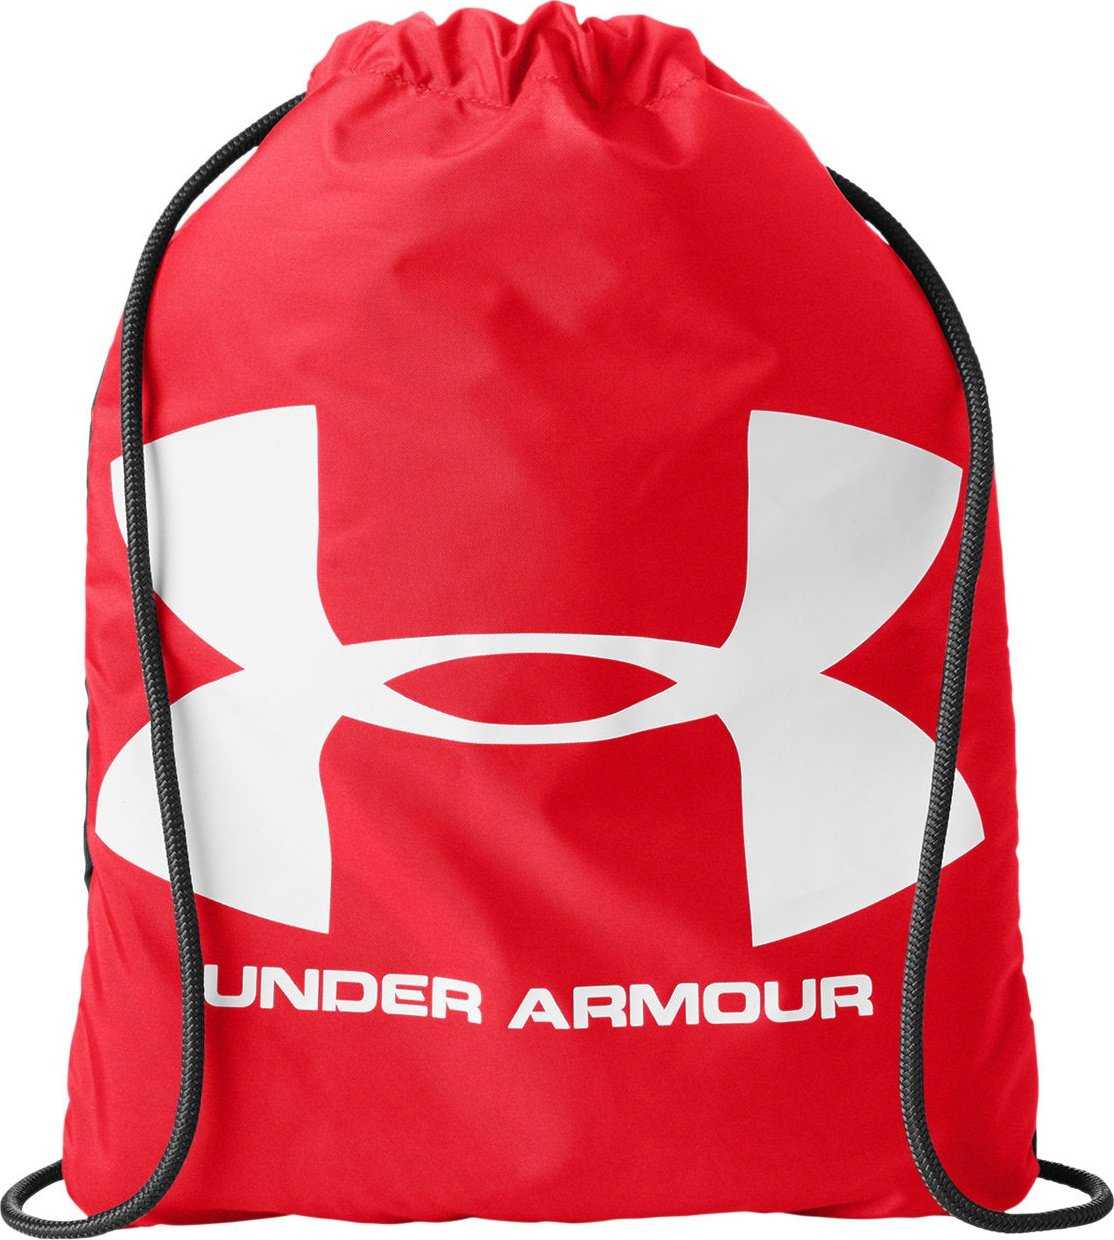 Under Armour 1240539 Ozsee Sackpack - Red Red